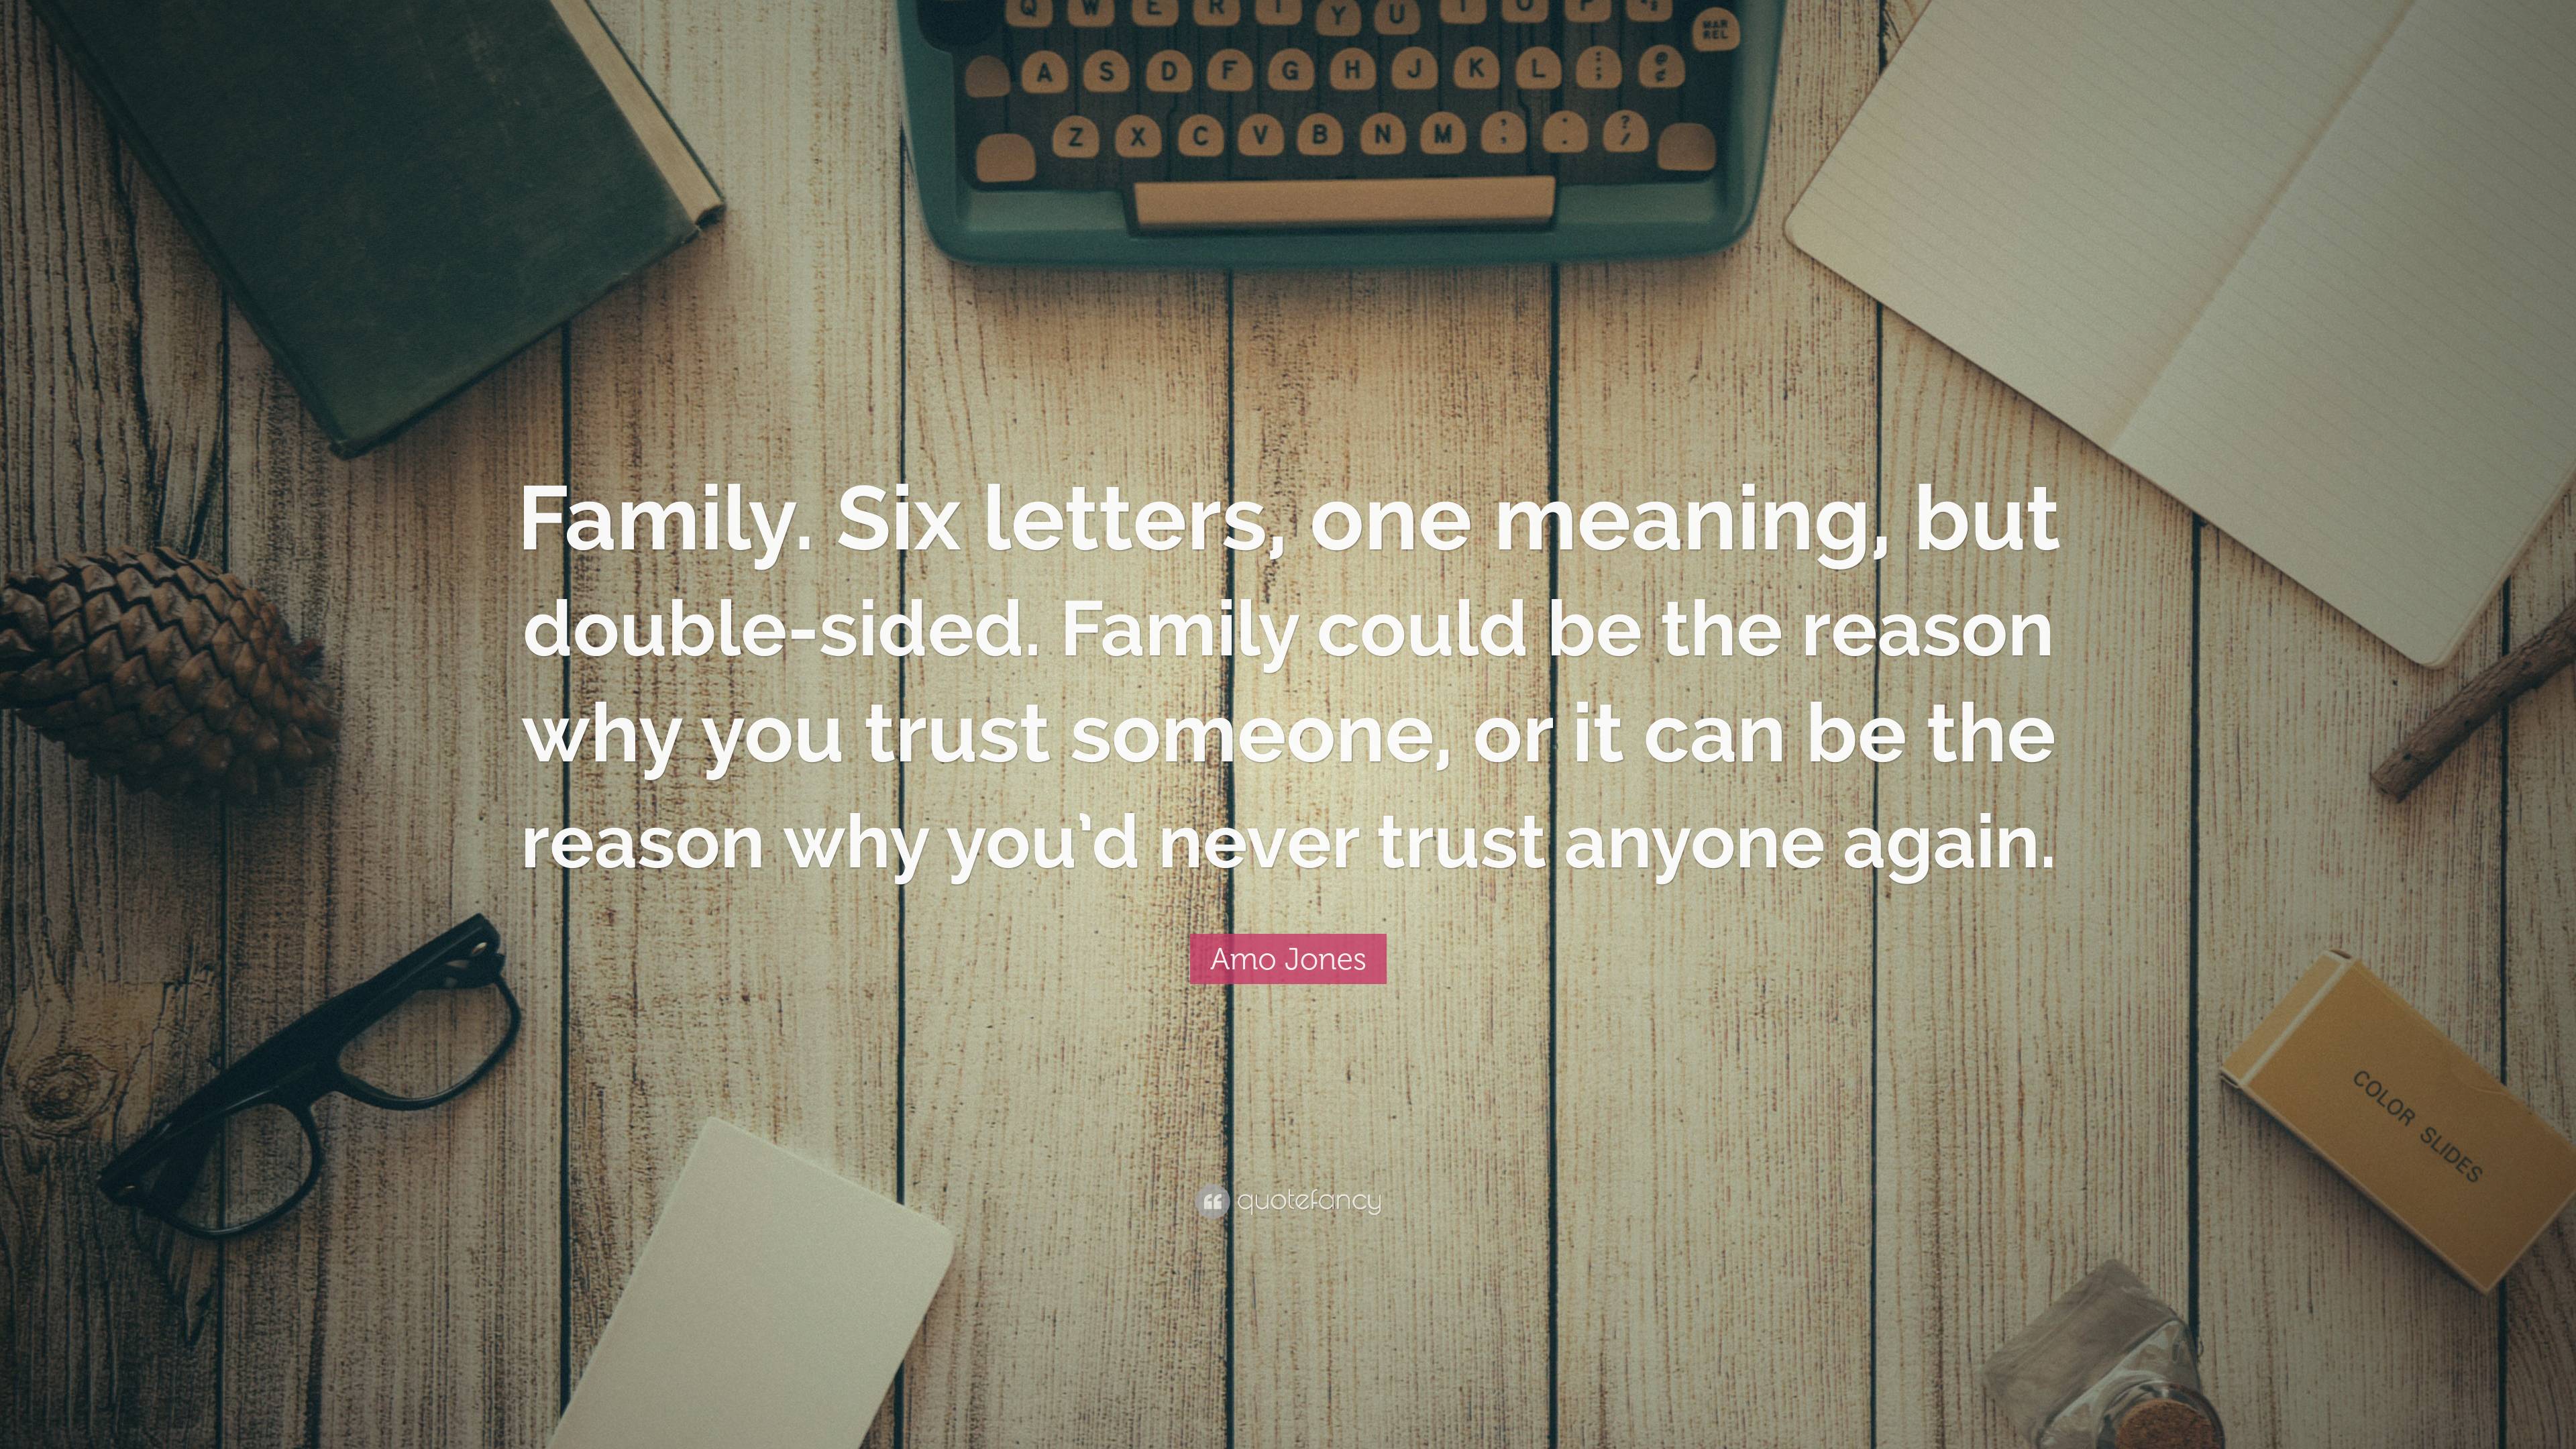 Amo Jones Quote: “Family. Six letters, one meaning, but double